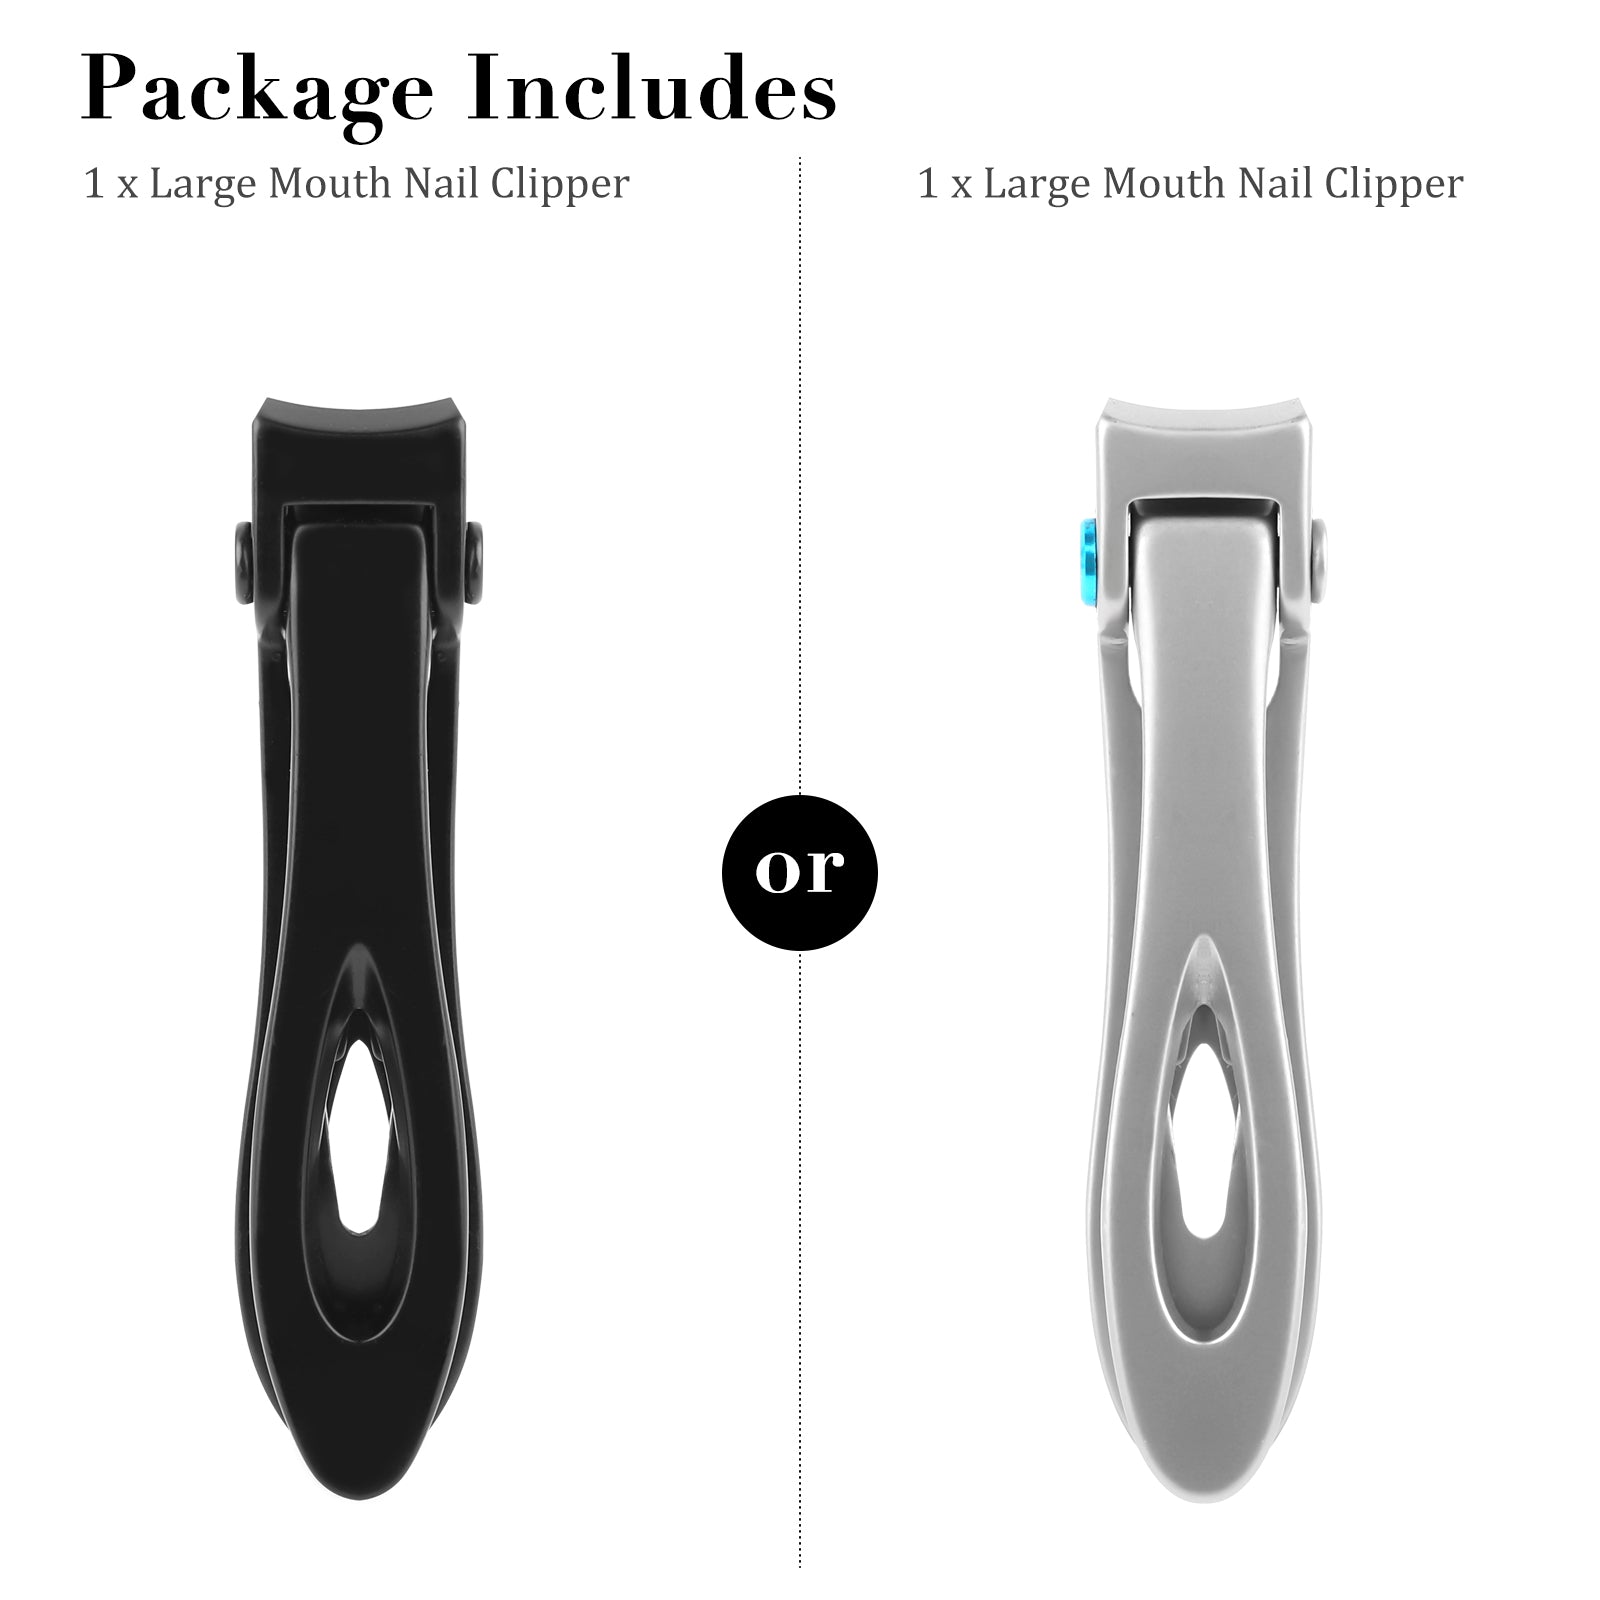 Wide Jaw Easy Grip Professional Large Toenail Clippers For Thick Nails, Heavy Duty Carbon Steel Nail Clippers for Men Women Seniors